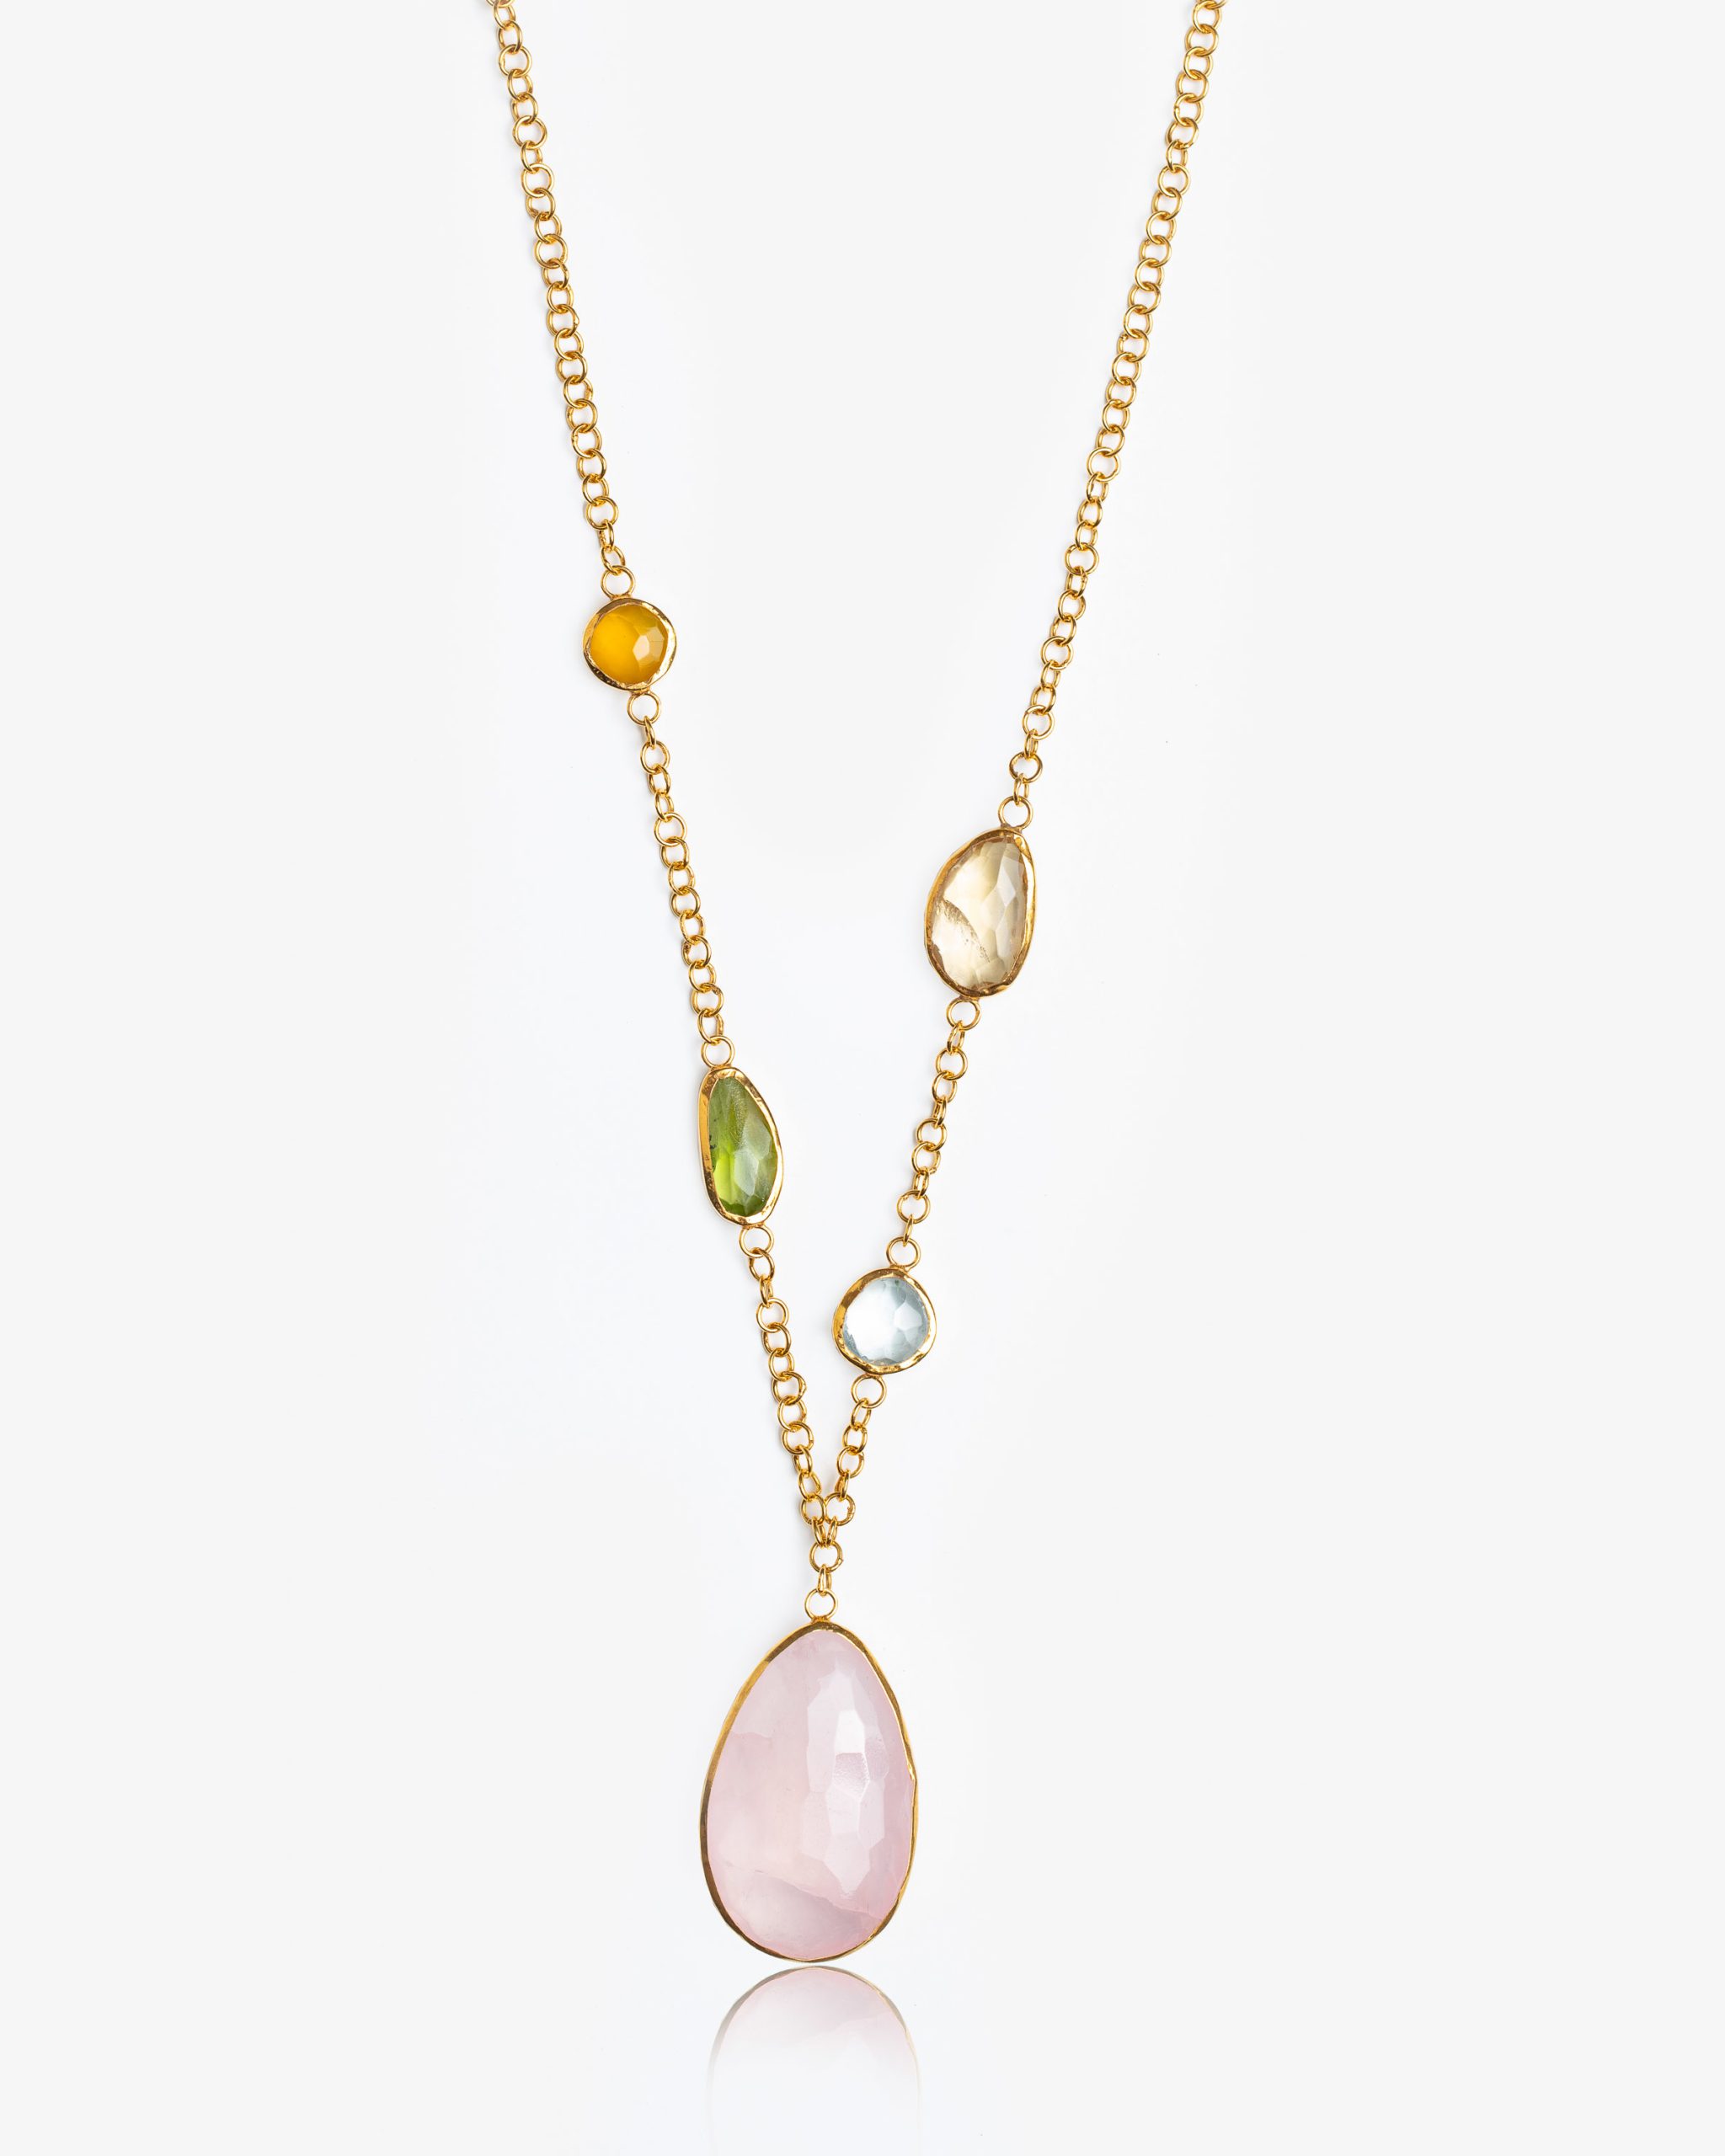 Johnny Was' collection with Pippa Small - Multi Stone Necklace